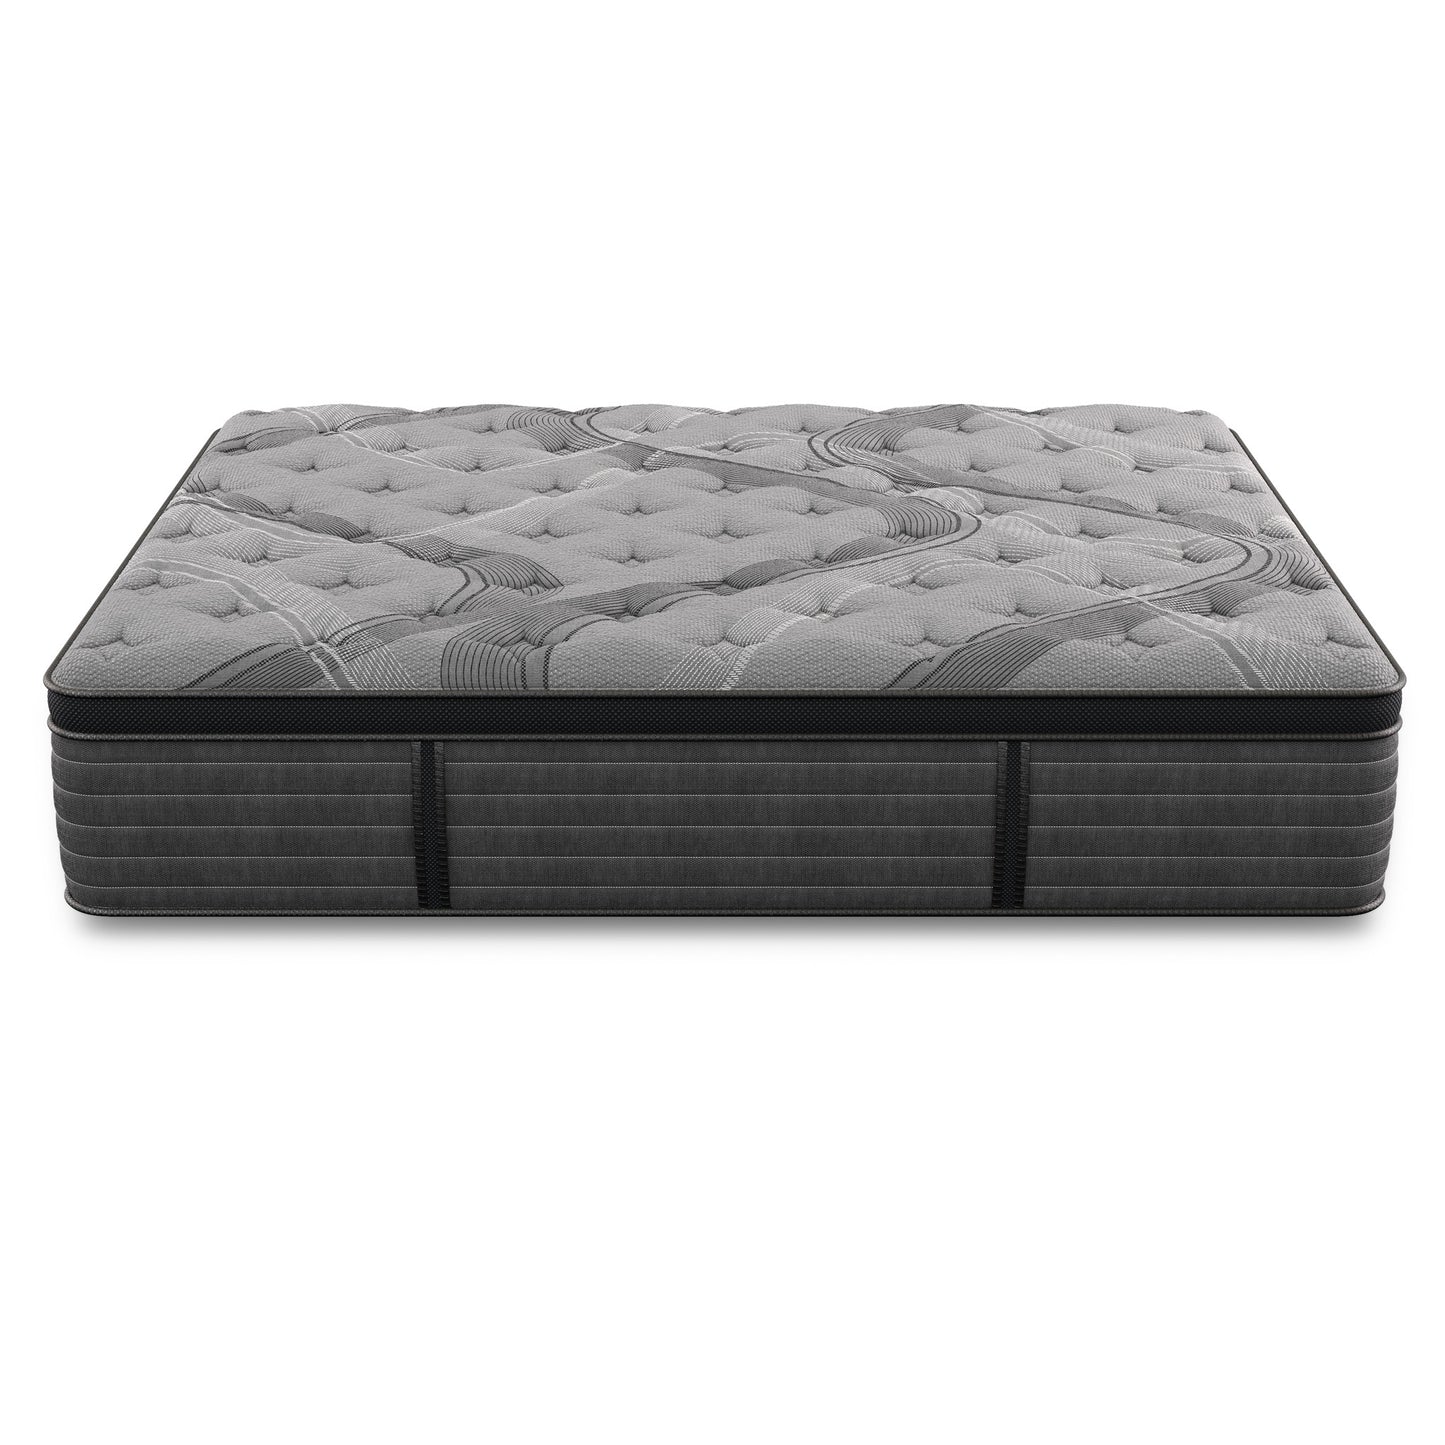 Graphene Cool Hybrid Euro-Top 14.5" Firm Mattress (Compare to Nolah™)